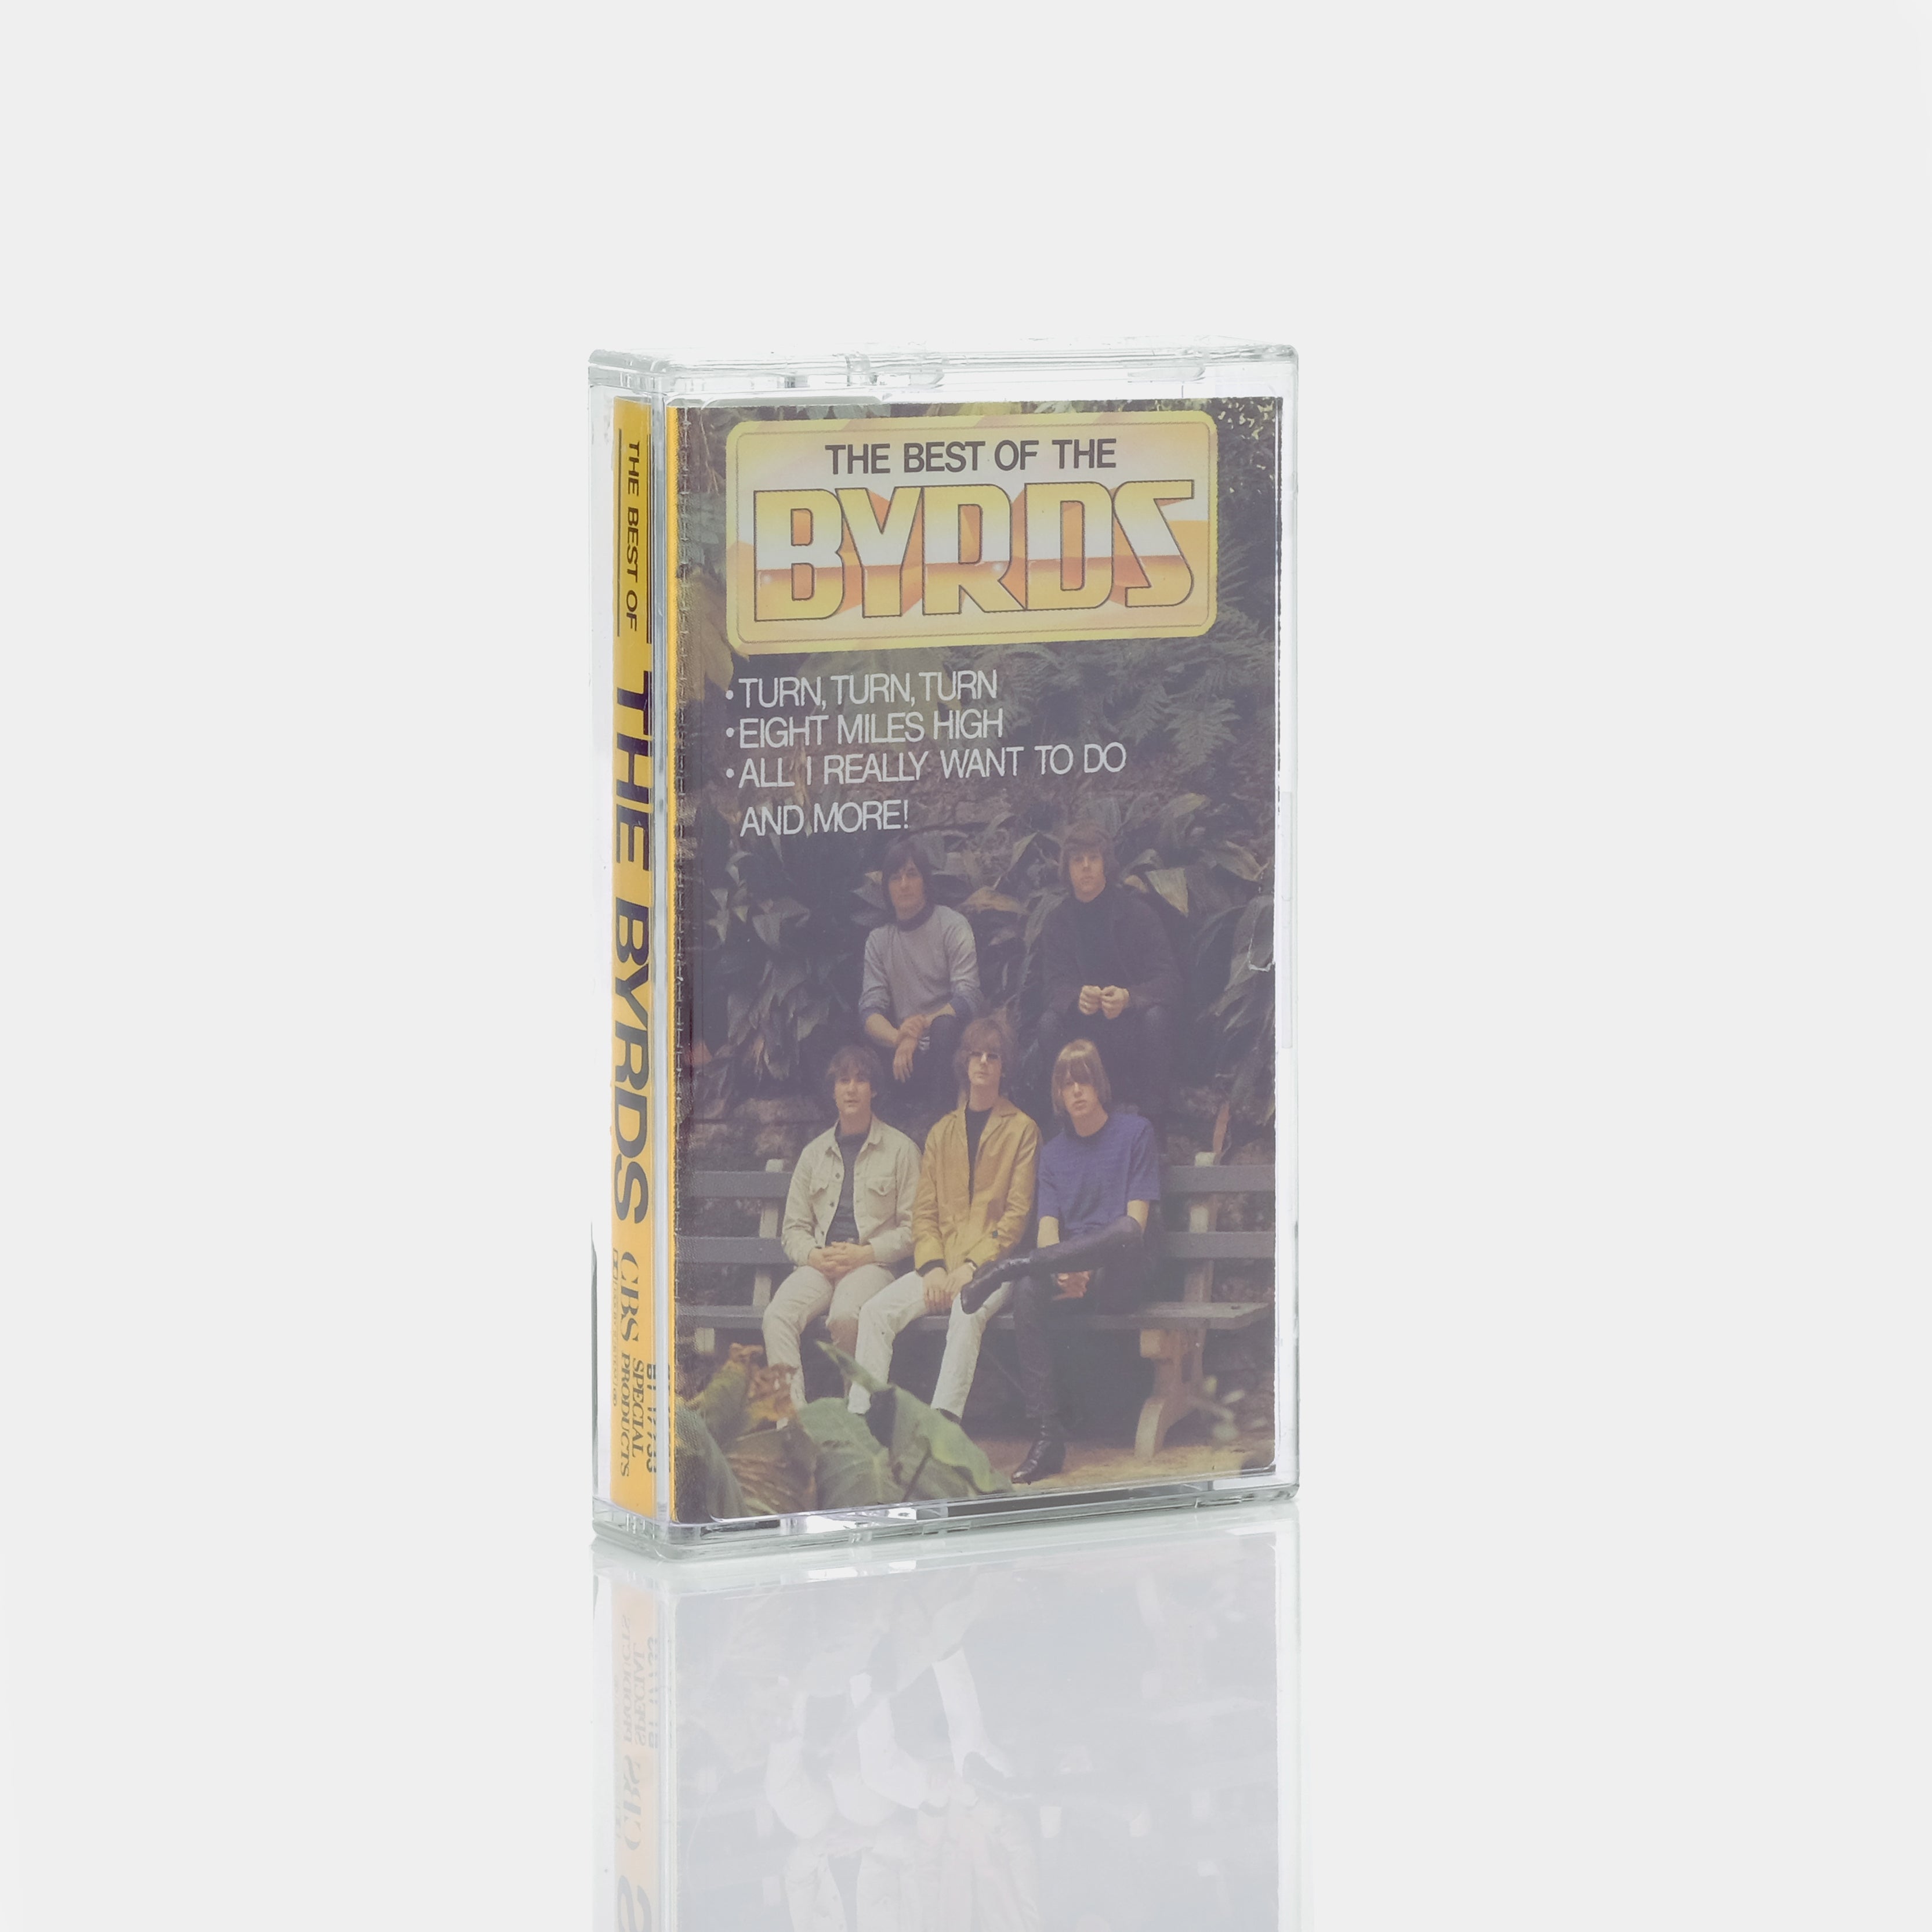 The Byrds - The Best Of The Byrds Cassette Tape